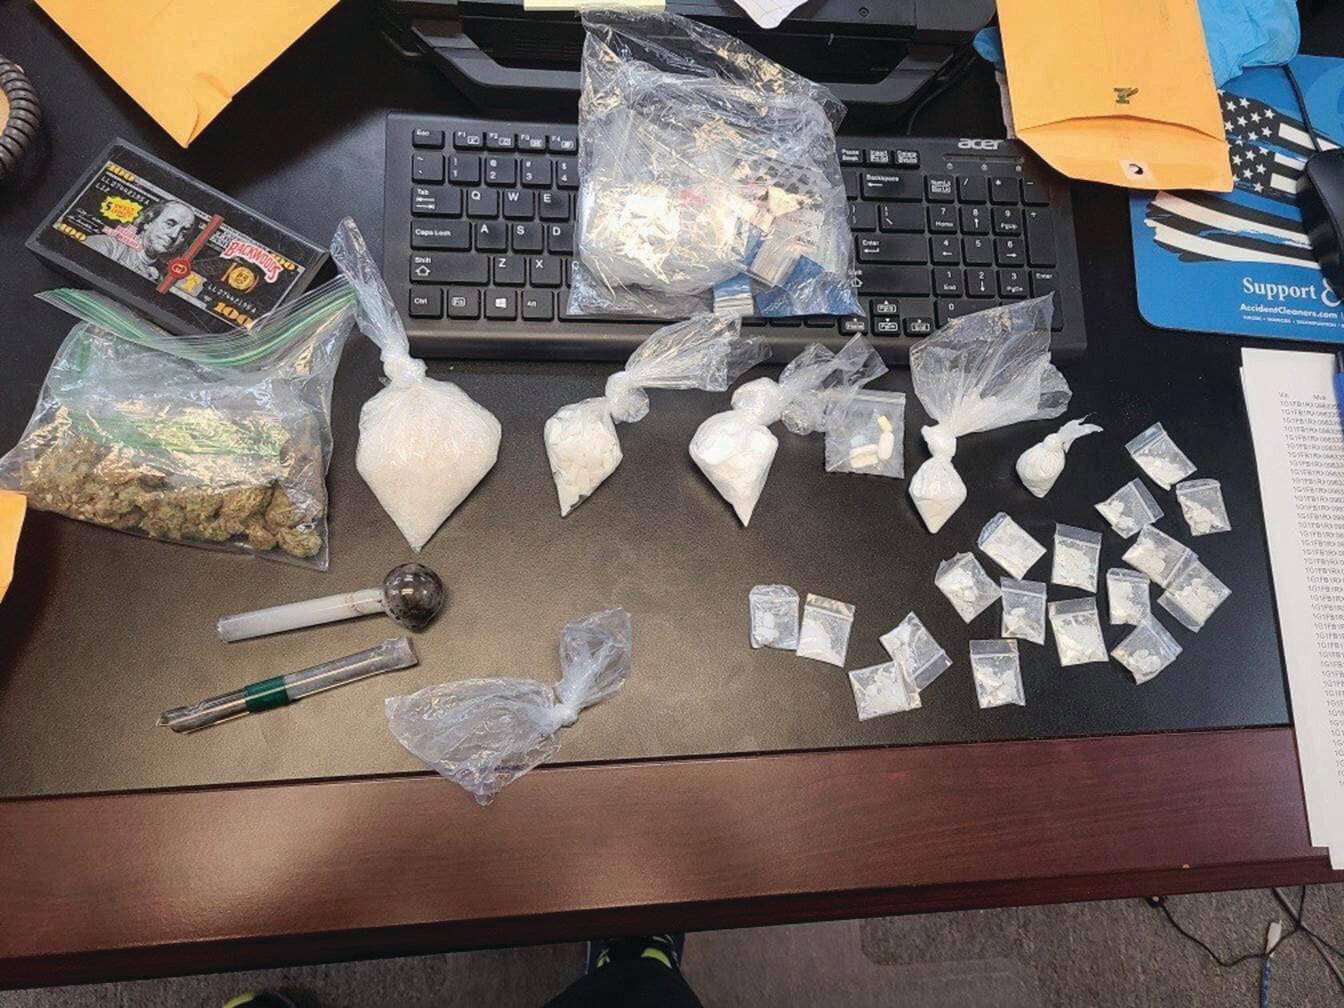 Deputies searched the vehicle and found more than 20 grams of fentanyl in 17 individual sealed baggies, 60 grams of pure crystal methamphetamine, more than 13 grams of cocaine, Loratab, Alprazolam, paraphernalia and more than 16 grams of cocaine base in a metal box.